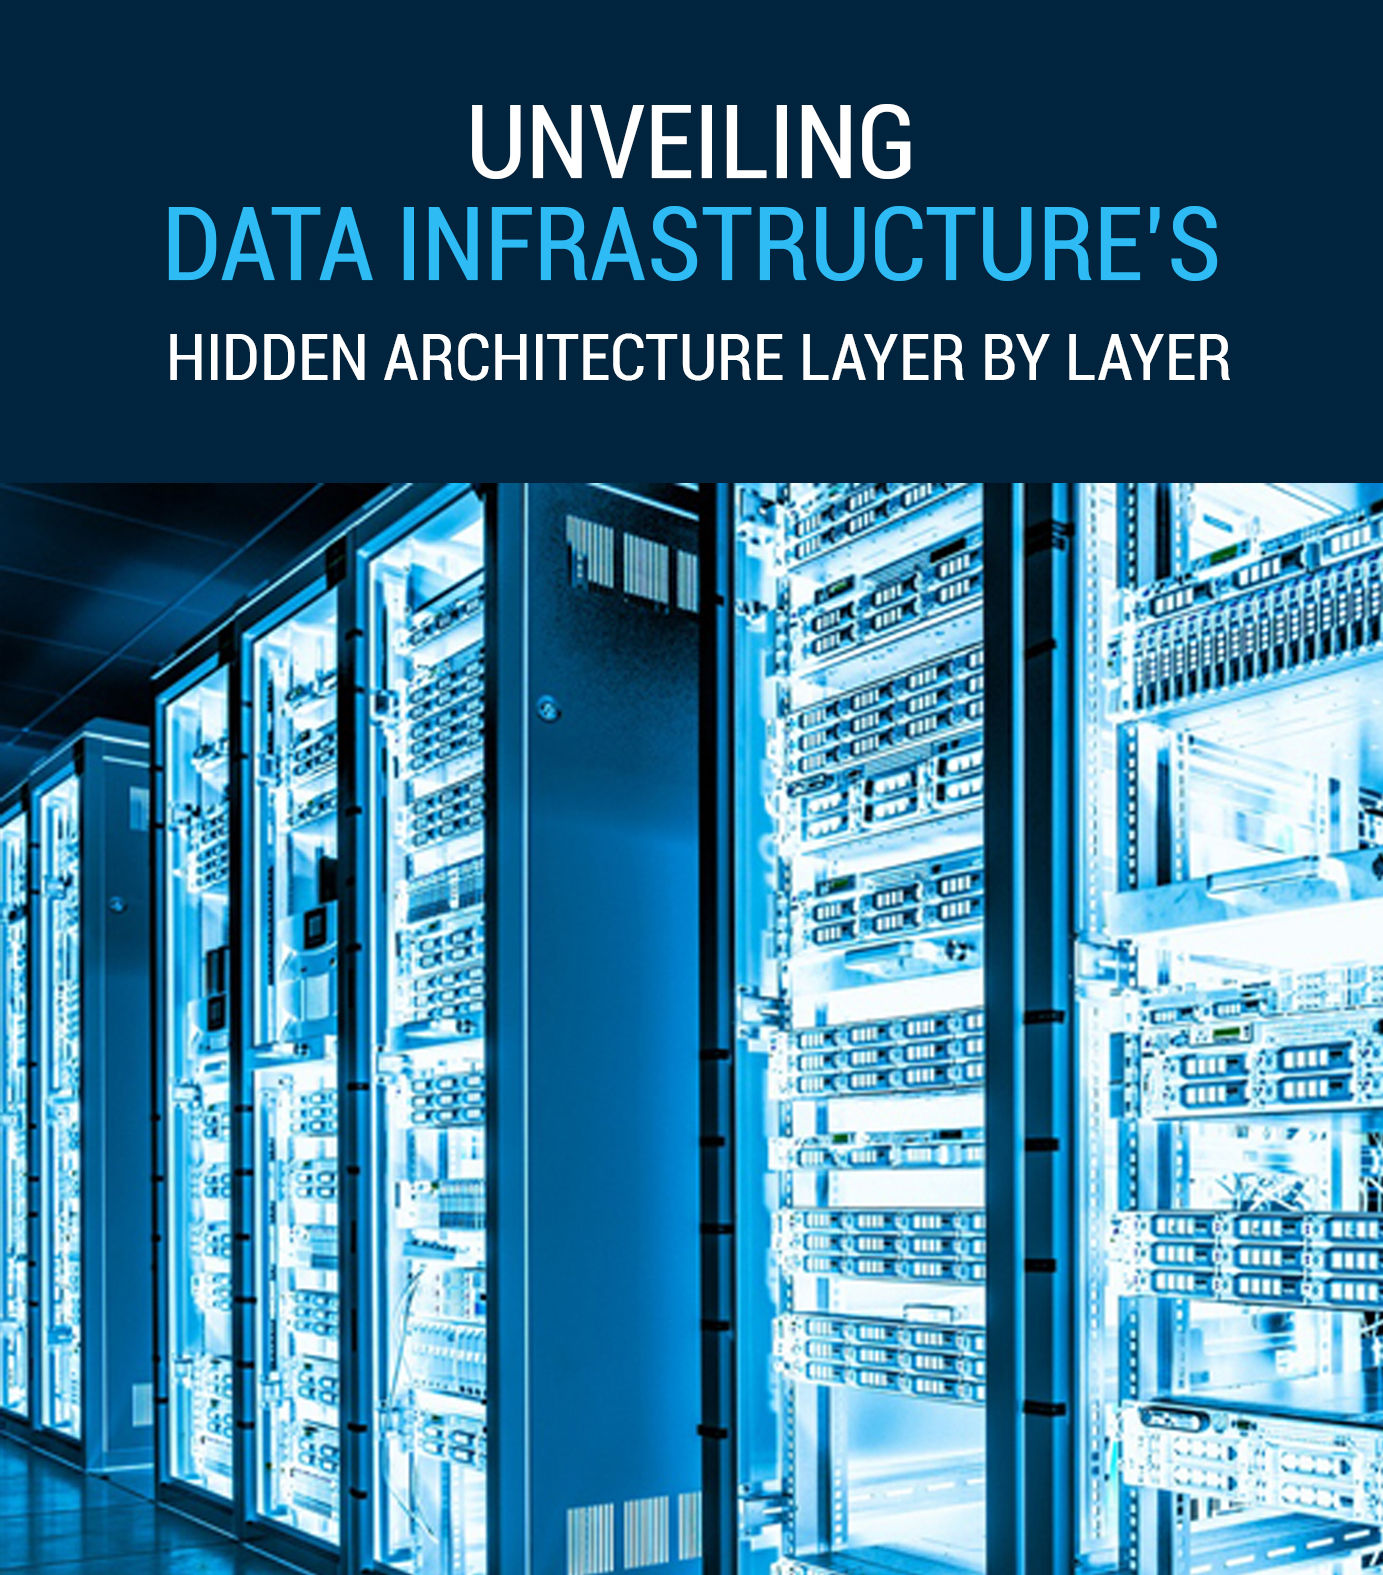 Unveiling Data Infrastructure’s Hidden Architecture Layer by Layer